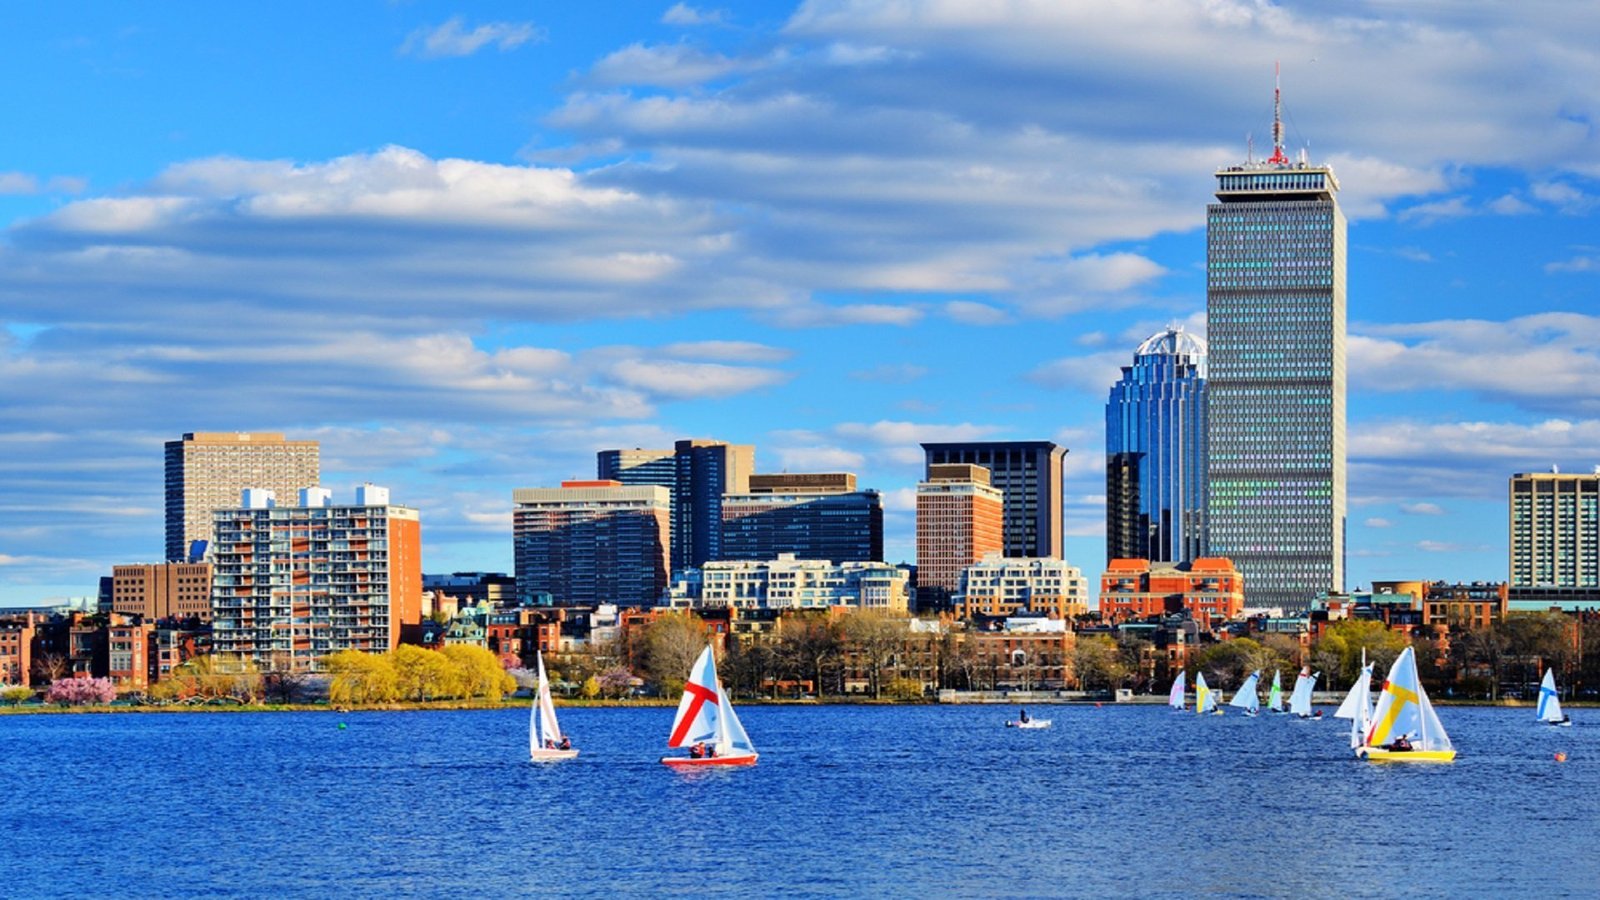 Best Places To Visit In Boston USA Boston Vacation Travel Guide Zen Tripstar trip explore attractions tourism Boston guide Boston vacat